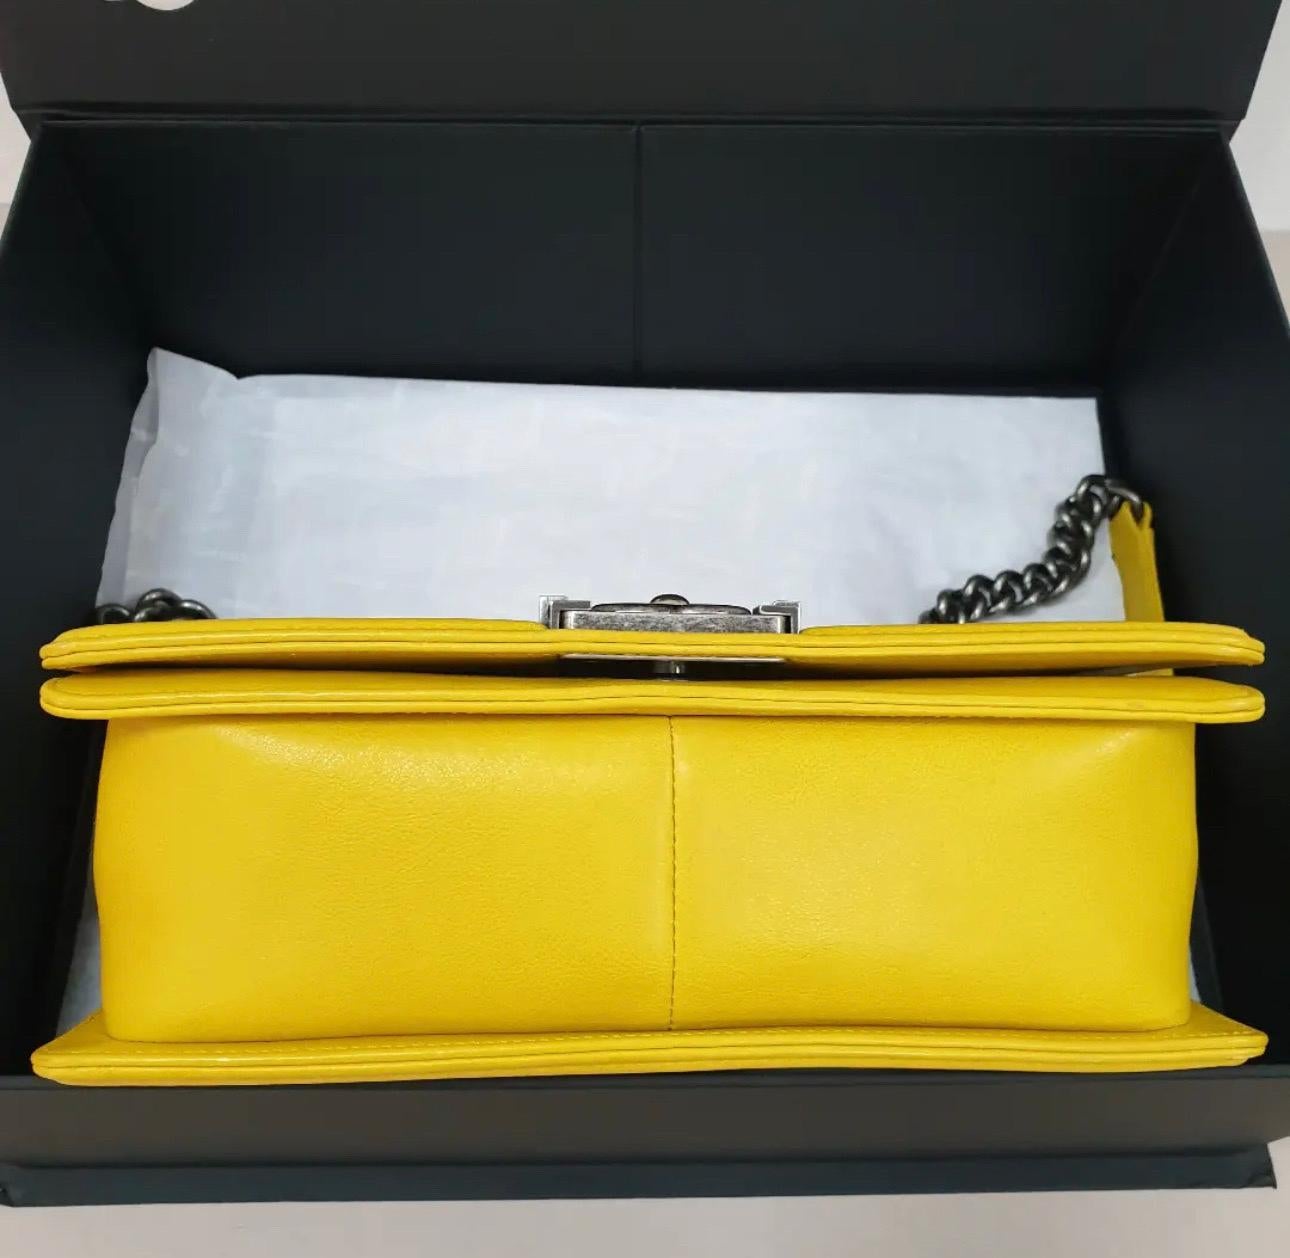 Chanel medium boy bag in yellow leather with ruthenium hardware. 
Height: 6 in (15.24 cm)
Width: 3.5 in (8.89 cm)
Length: 10 in (25.4 cm)
Very good condition.
No box. No dust bag